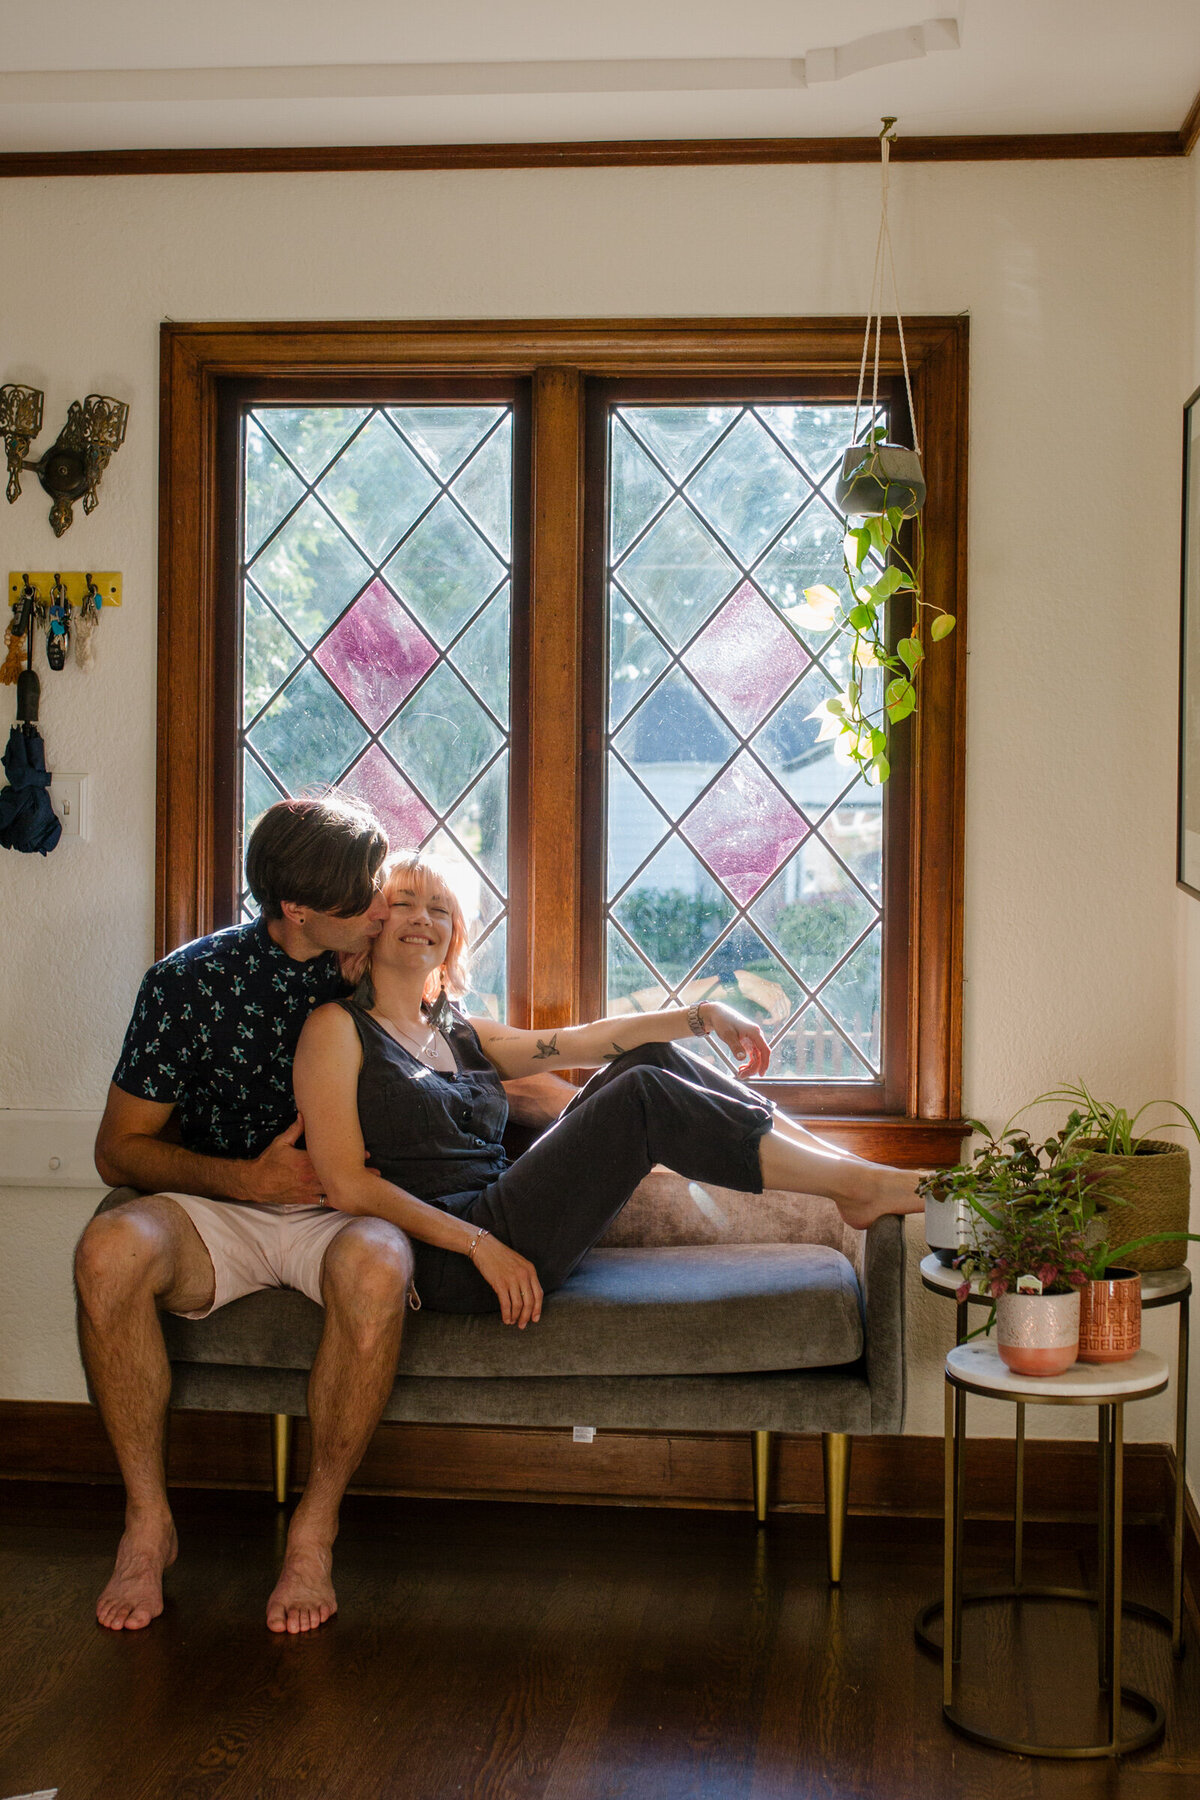 A couple cuddling on a couch near a window in their house.